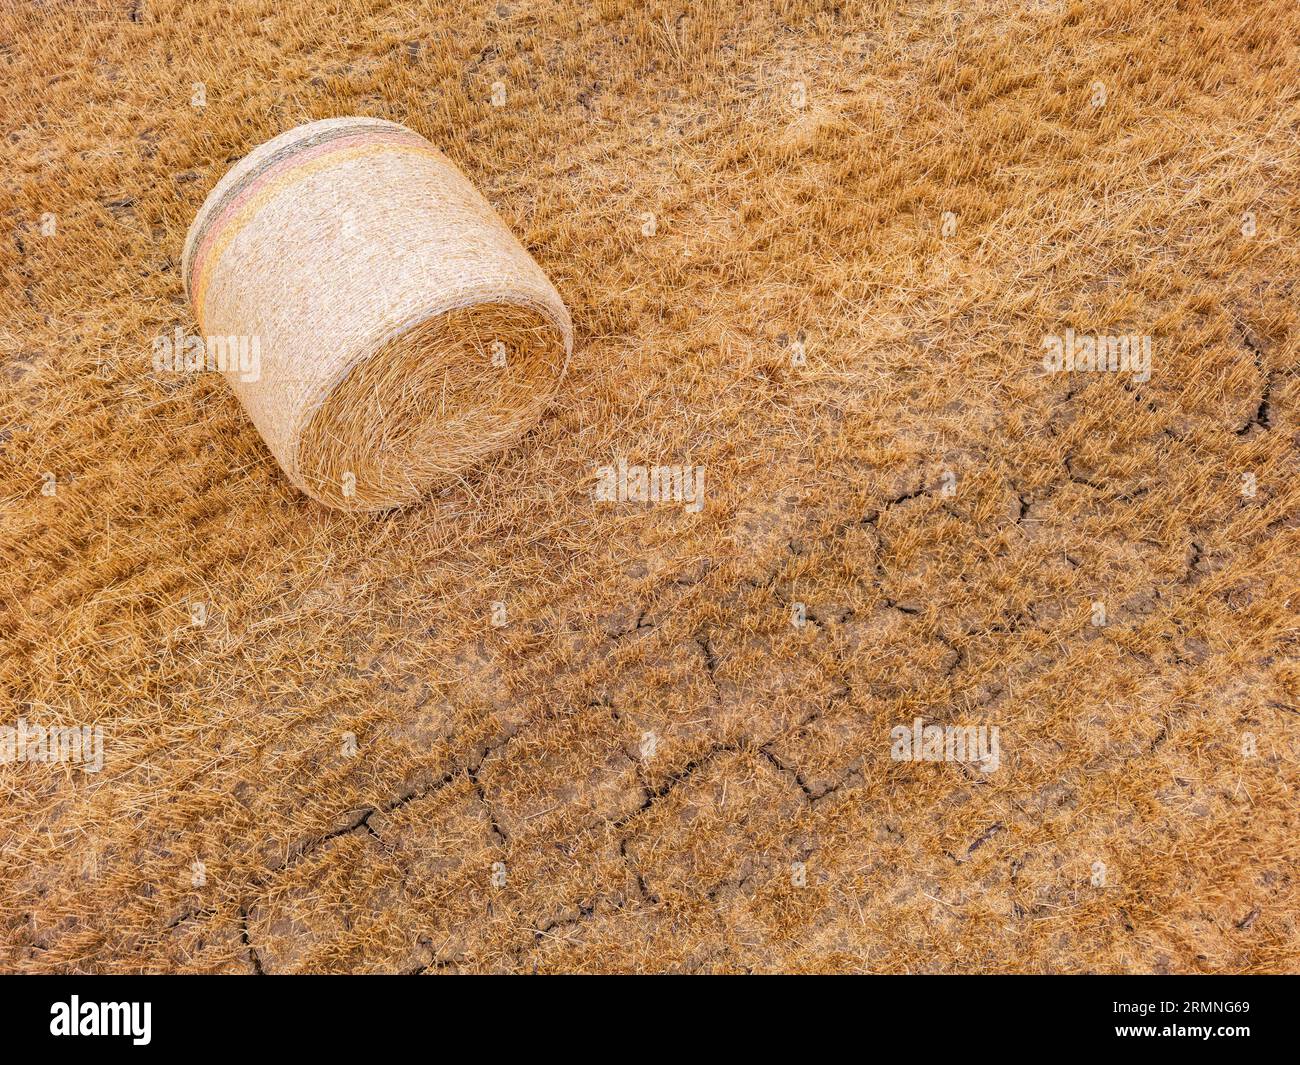 A round pressed hay bale on earth soil with cracks due to dryness as aerial photograph, Germany Stock Photo